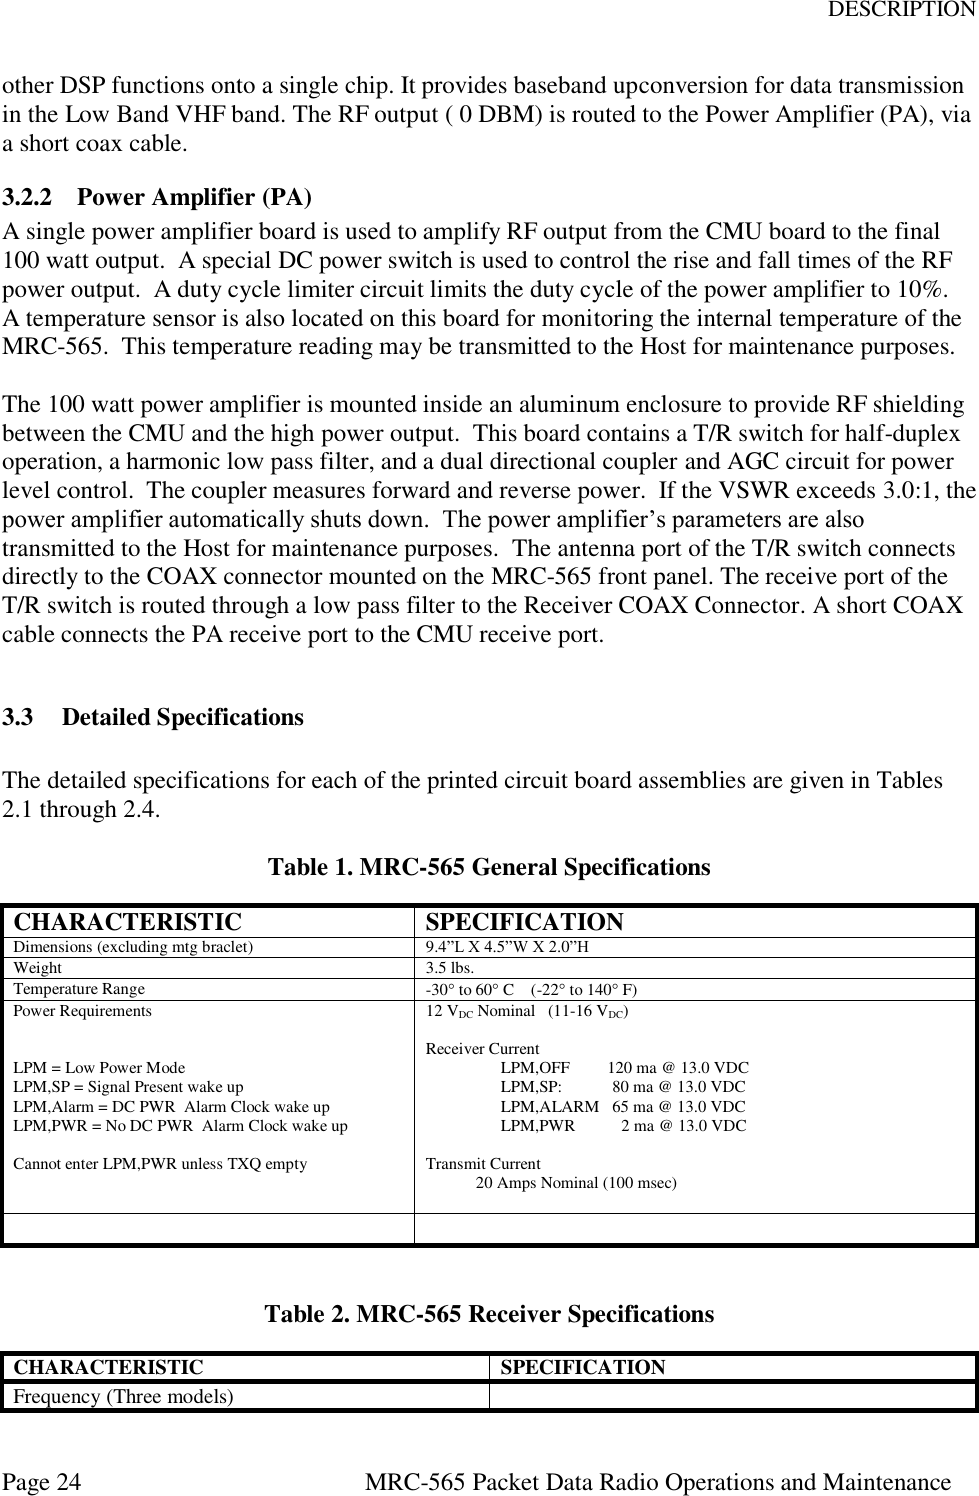 DESCRIPTION Page 24  MRC-565 Packet Data Radio Operations and Maintenance other DSP functions onto a single chip. It provides baseband upconversion for data transmission in the Low Band VHF band. The RF output ( 0 DBM) is routed to the Power Amplifier (PA), via a short coax cable. 3.2.2 Power Amplifier (PA) A single power amplifier board is used to amplify RF output from the CMU board to the final 100 watt output.  A special DC power switch is used to control the rise and fall times of the RF power output.  A duty cycle limiter circuit limits the duty cycle of the power amplifier to 10%.  A temperature sensor is also located on this board for monitoring the internal temperature of the MRC-565.  This temperature reading may be transmitted to the Host for maintenance purposes.  The 100 watt power amplifier is mounted inside an aluminum enclosure to provide RF shielding between the CMU and the high power output.  This board contains a T/R switch for half-duplex operation, a harmonic low pass filter, and a dual directional coupler and AGC circuit for power level control.  The coupler measures forward and reverse power.  If the VSWR exceeds 3.0:1, the power amplifier automatically shuts down.  The power amplifier’s parameters are also transmitted to the Host for maintenance purposes.  The antenna port of the T/R switch connects directly to the COAX connector mounted on the MRC-565 front panel. The receive port of the T/R switch is routed through a low pass filter to the Receiver COAX Connector. A short COAX cable connects the PA receive port to the CMU receive port.  3.3 Detailed Specifications  The detailed specifications for each of the printed circuit board assemblies are given in Tables 2.1 through 2.4.   Table 1. MRC-565 General Specifications CHARACTERISTIC SPECIFICATION Dimensions (excluding mtg braclet) 9.4”L X 4.5”W X 2.0”H Weight 3.5 lbs. Temperature Range -30 to 60 C    (-22 to 140 F) Power Requirements   LPM = Low Power Mode LPM,SP = Signal Present wake up LPM,Alarm = DC PWR  Alarm Clock wake up LPM,PWR = No DC PWR  Alarm Clock wake up   Cannot enter LPM,PWR unless TXQ empty 12 VDC Nominal   (11-16 VDC)  Receiver Current LPM,OFF         120 ma @ 13.0 VDC  LPM,SP:            80 ma @ 13.0 VDC LPM,ALARM   65 ma @ 13.0 VDC                   LPM,PWR           2 ma @ 13.0 VDC  Transmit Current             20 Amps Nominal (100 msec)      Table 2. MRC-565 Receiver Specifications CHARACTERISTIC SPECIFICATION Frequency (Three models)  